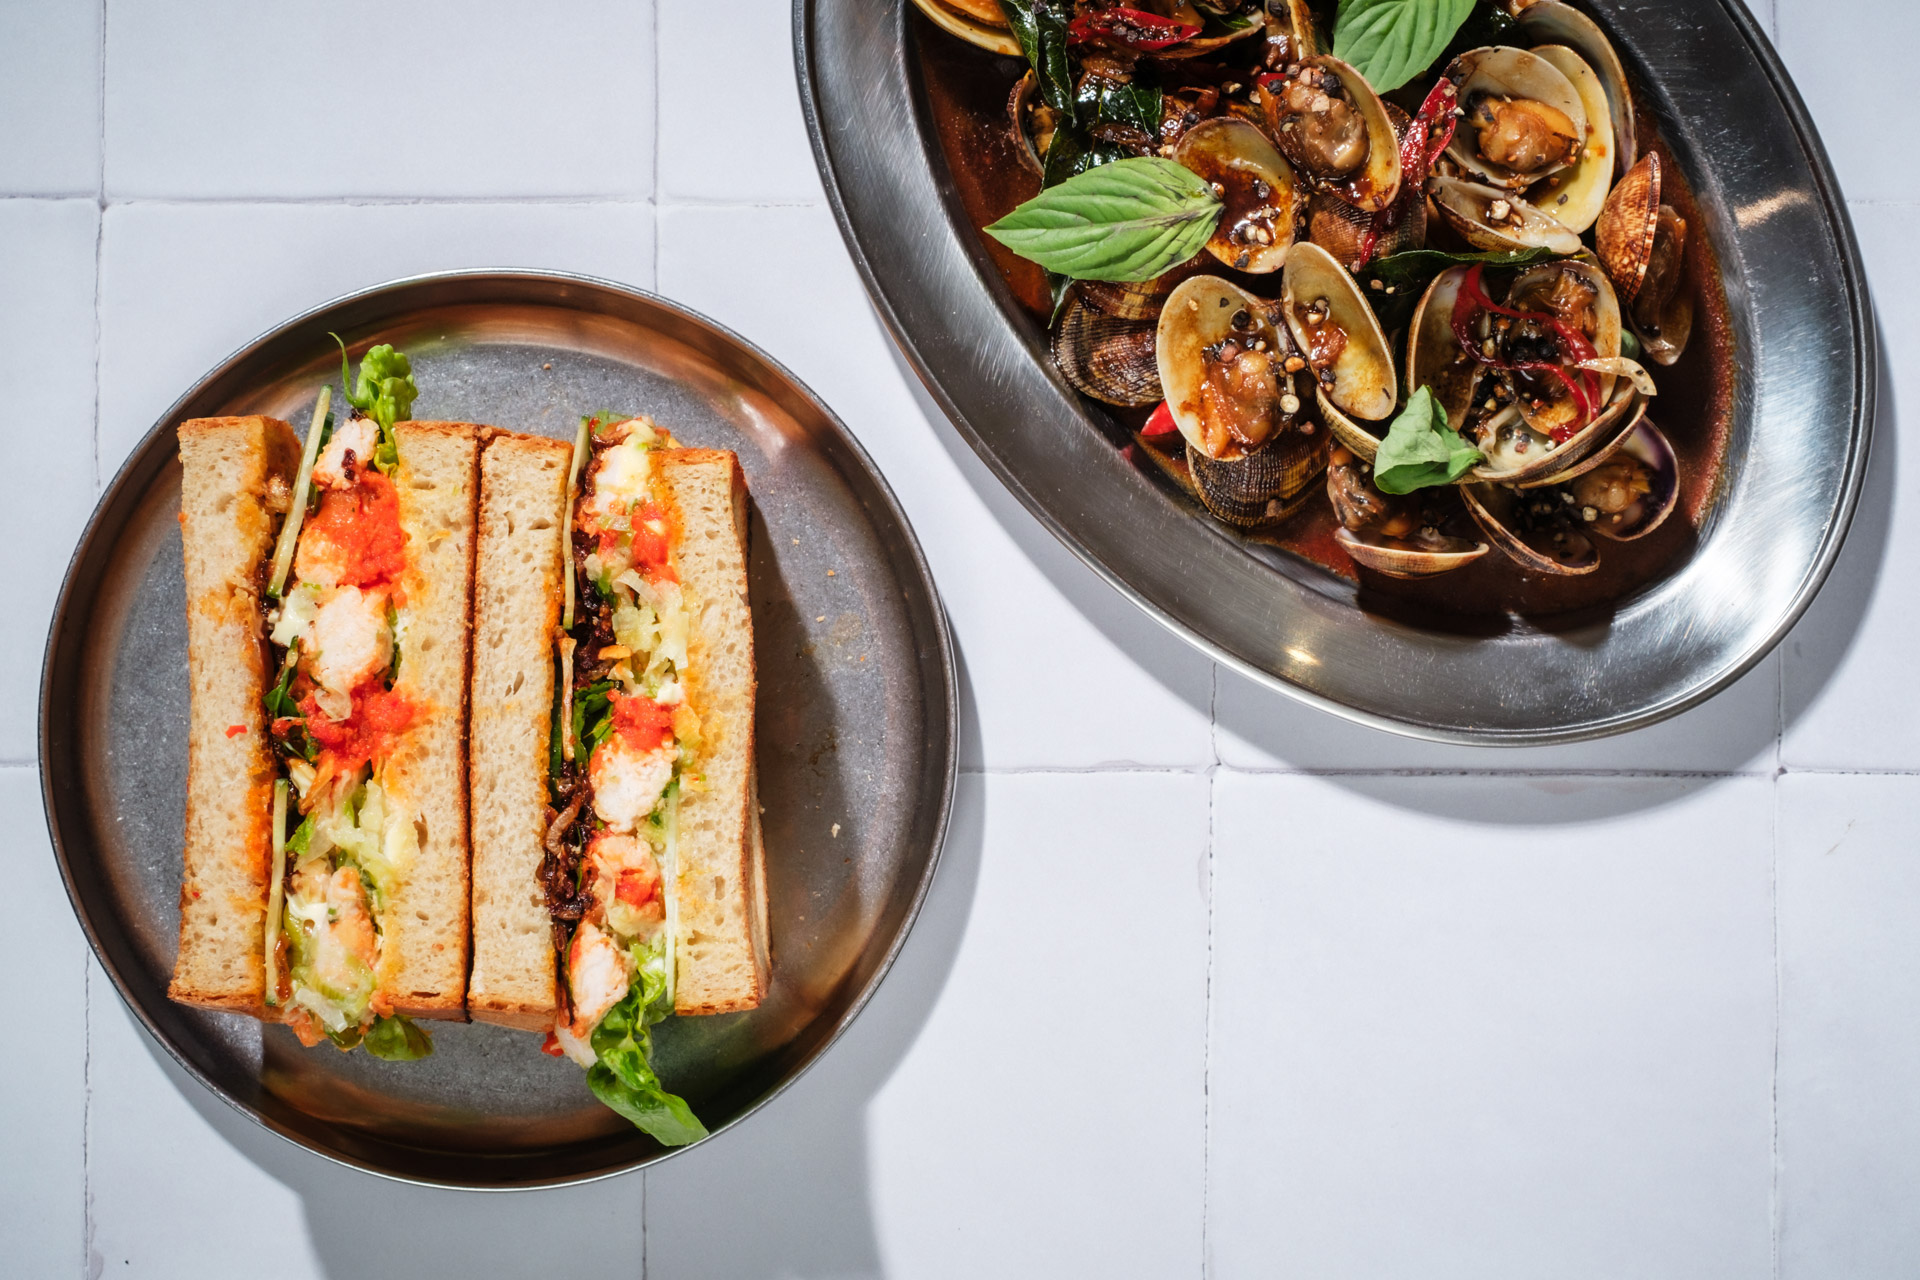 A Hainanese chicken sando and platter of clams, both on silver dishes